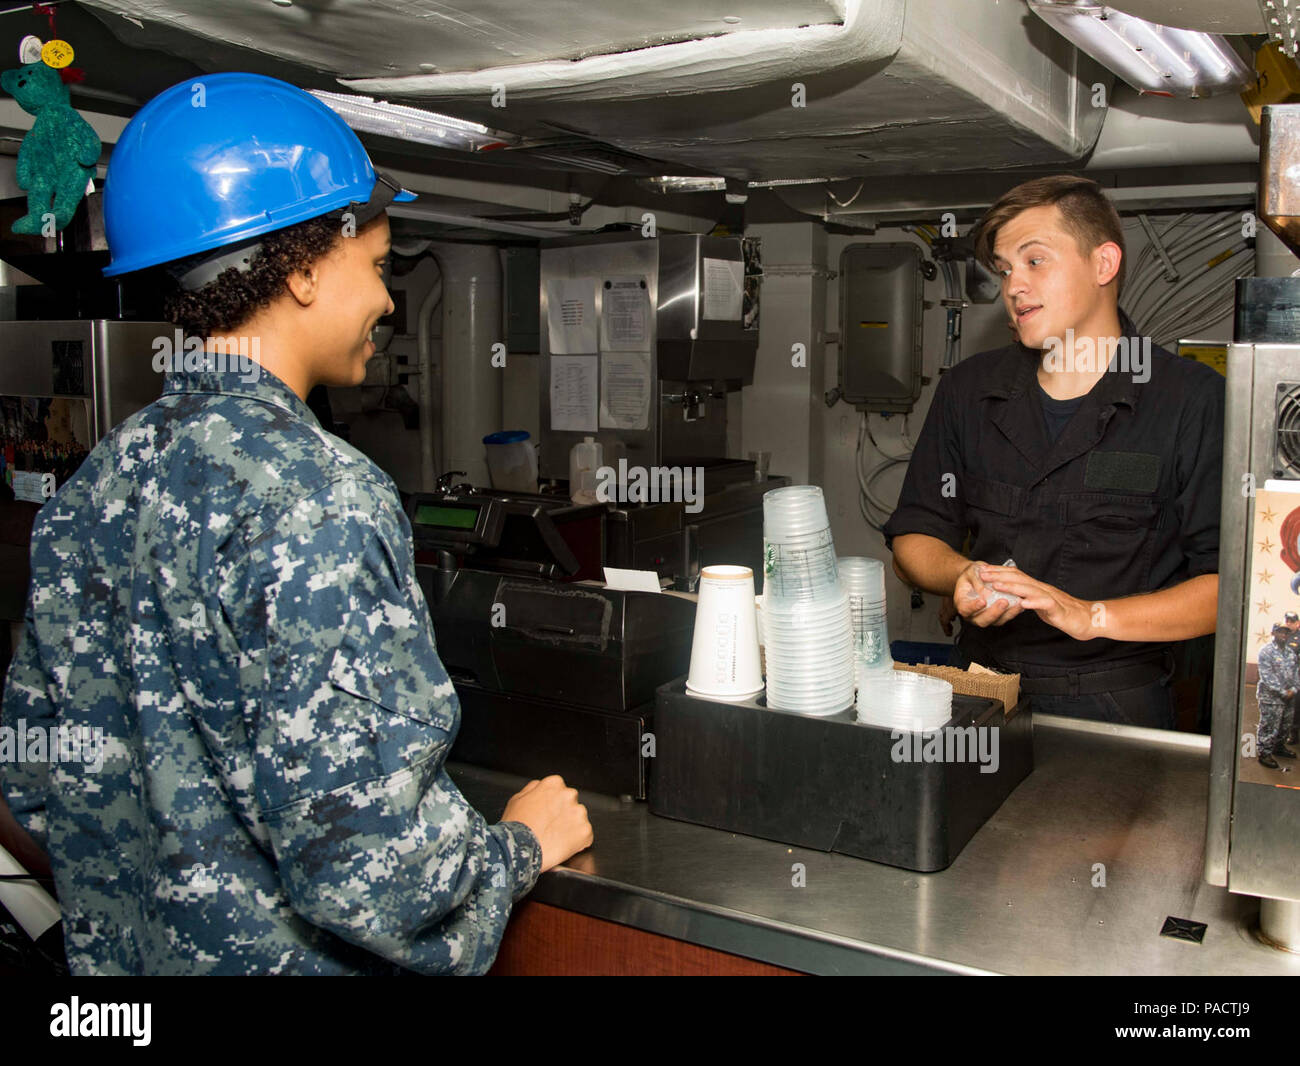 PORTSMOUTH, Va. (Aug. 23, 2017) Aviation Boatswain’s Mate (Handling) Airman Jasmine Miller, from Irmo, S.C., left, orders coffee from Airman Steven Swain, from Warner Robins, Ga., right, at the ship's coffee shop aboard the aircraft carrier USS Dwight D. Eisenhower (CVN 69)(Ike). Ike is preparing for a Planned Incremental Availability (PIA) at Norfolk Naval Shipyard during the maintenance phase of the Optimized Fleet Response Plan (OFRP) Stock Photo